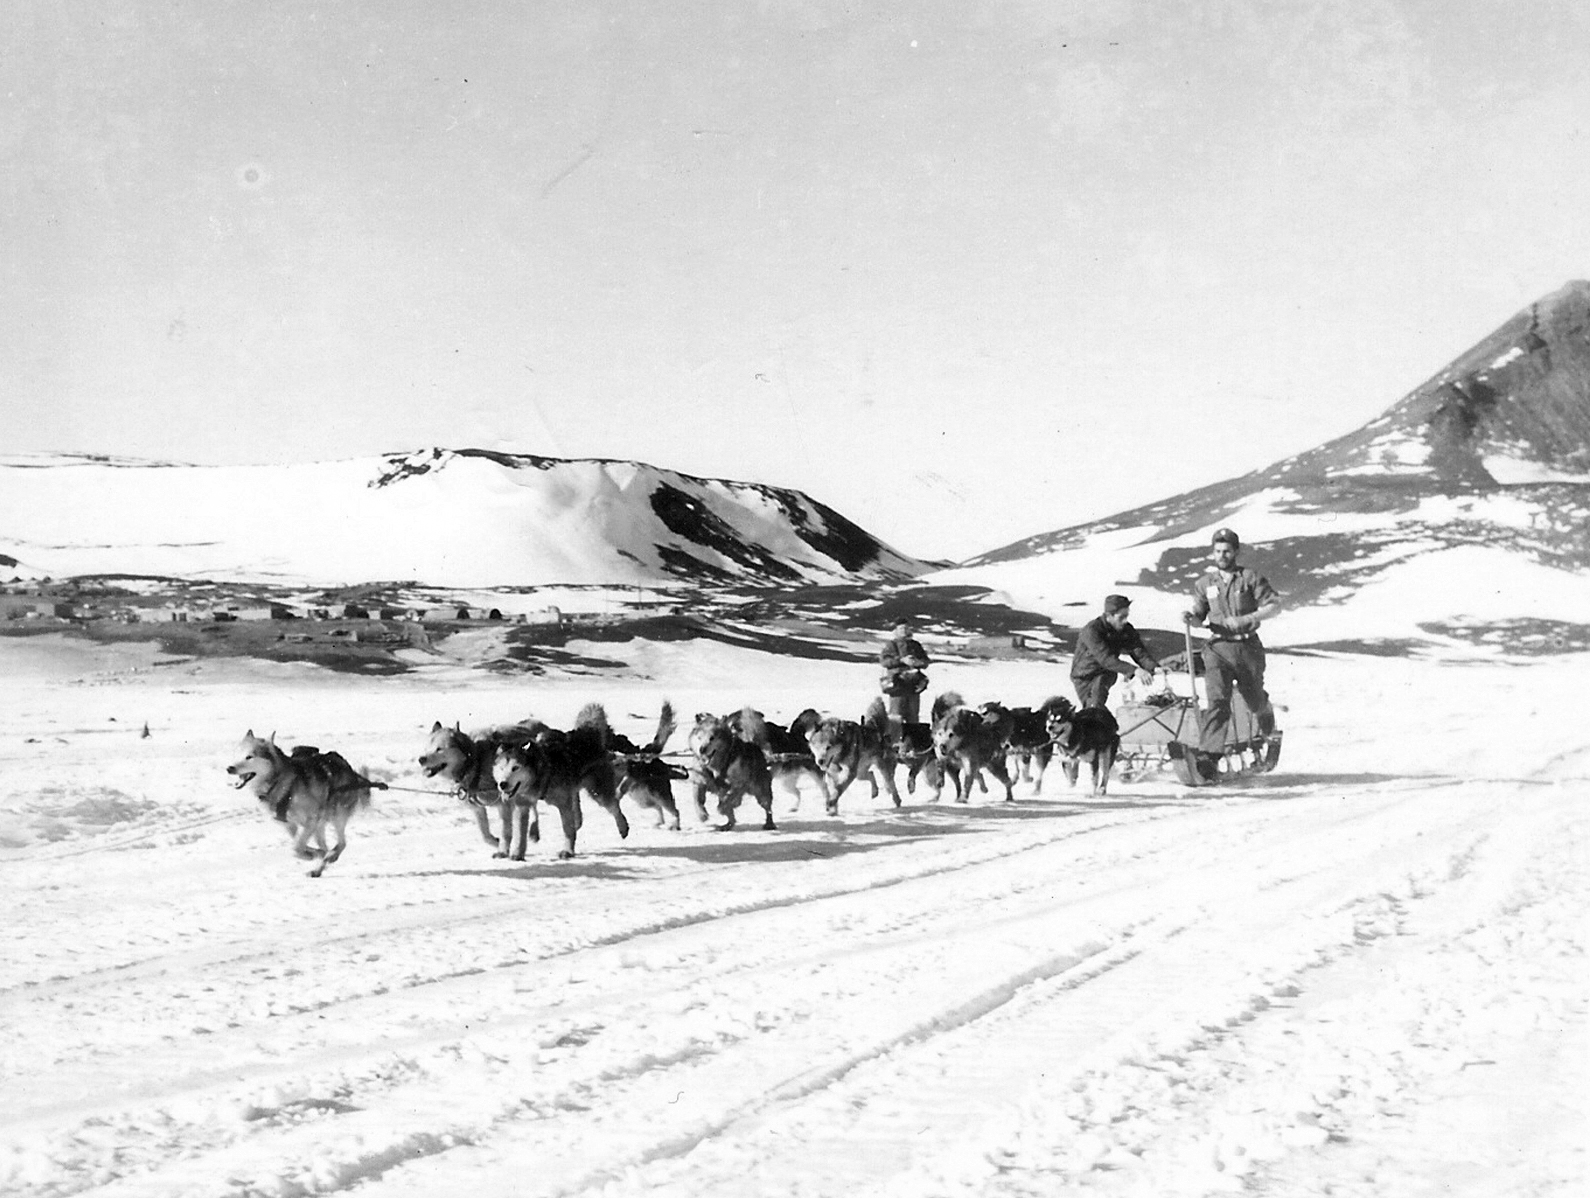 A team of sled dogs pulls a sled across snow.